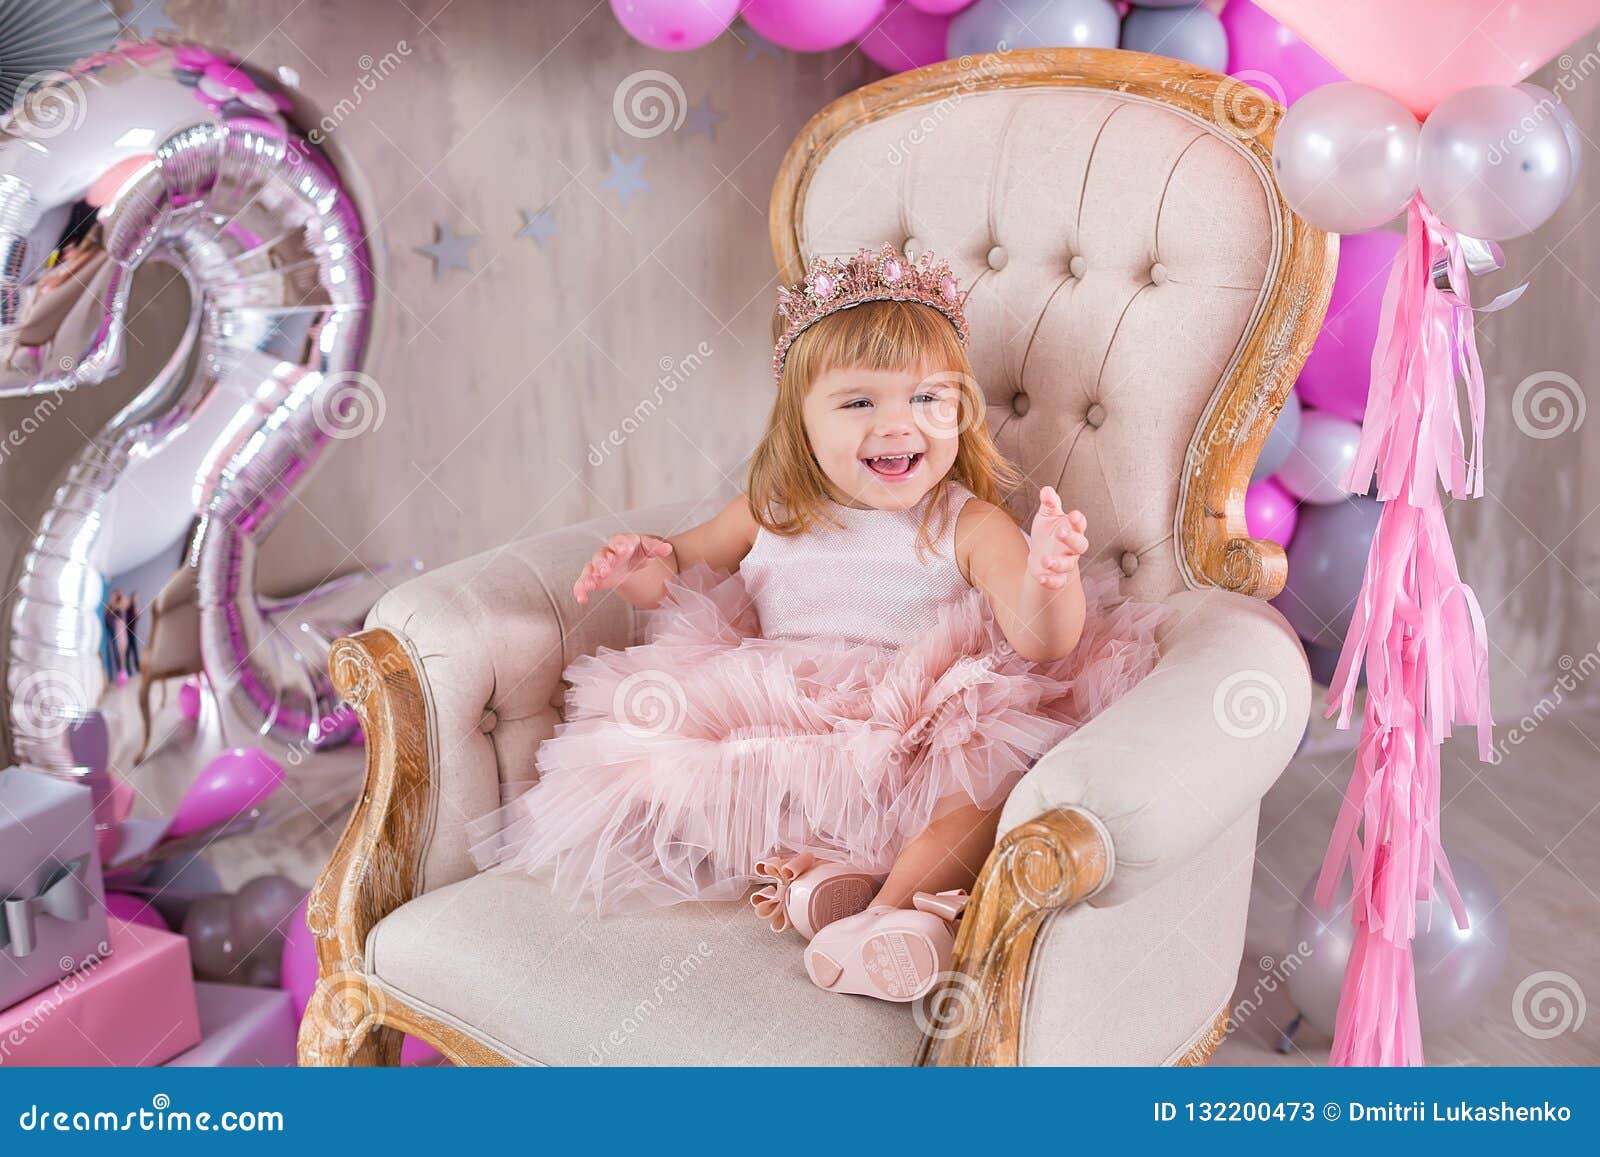 Princess Baby Girl Celebrating Life Event Wearing Golden Crown and ...